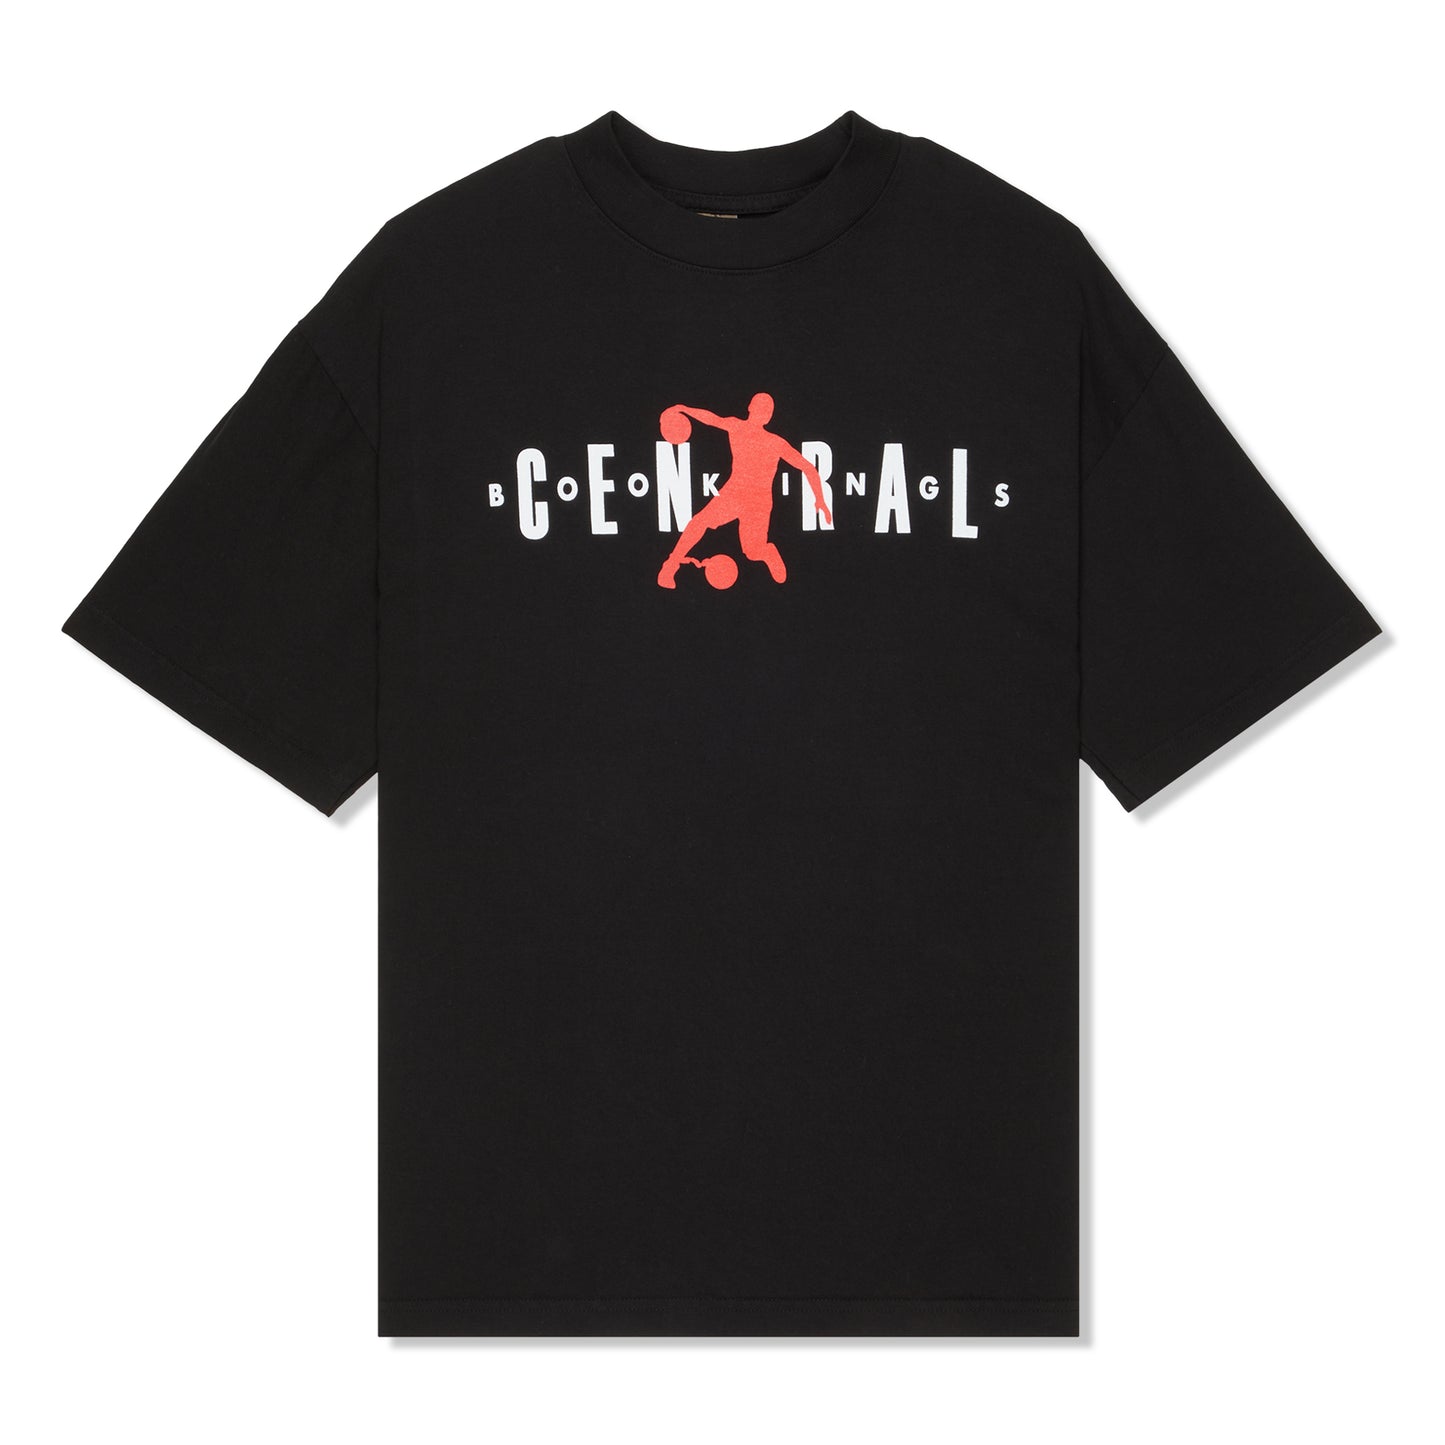 Central Bookings Crossover Tee (Black)